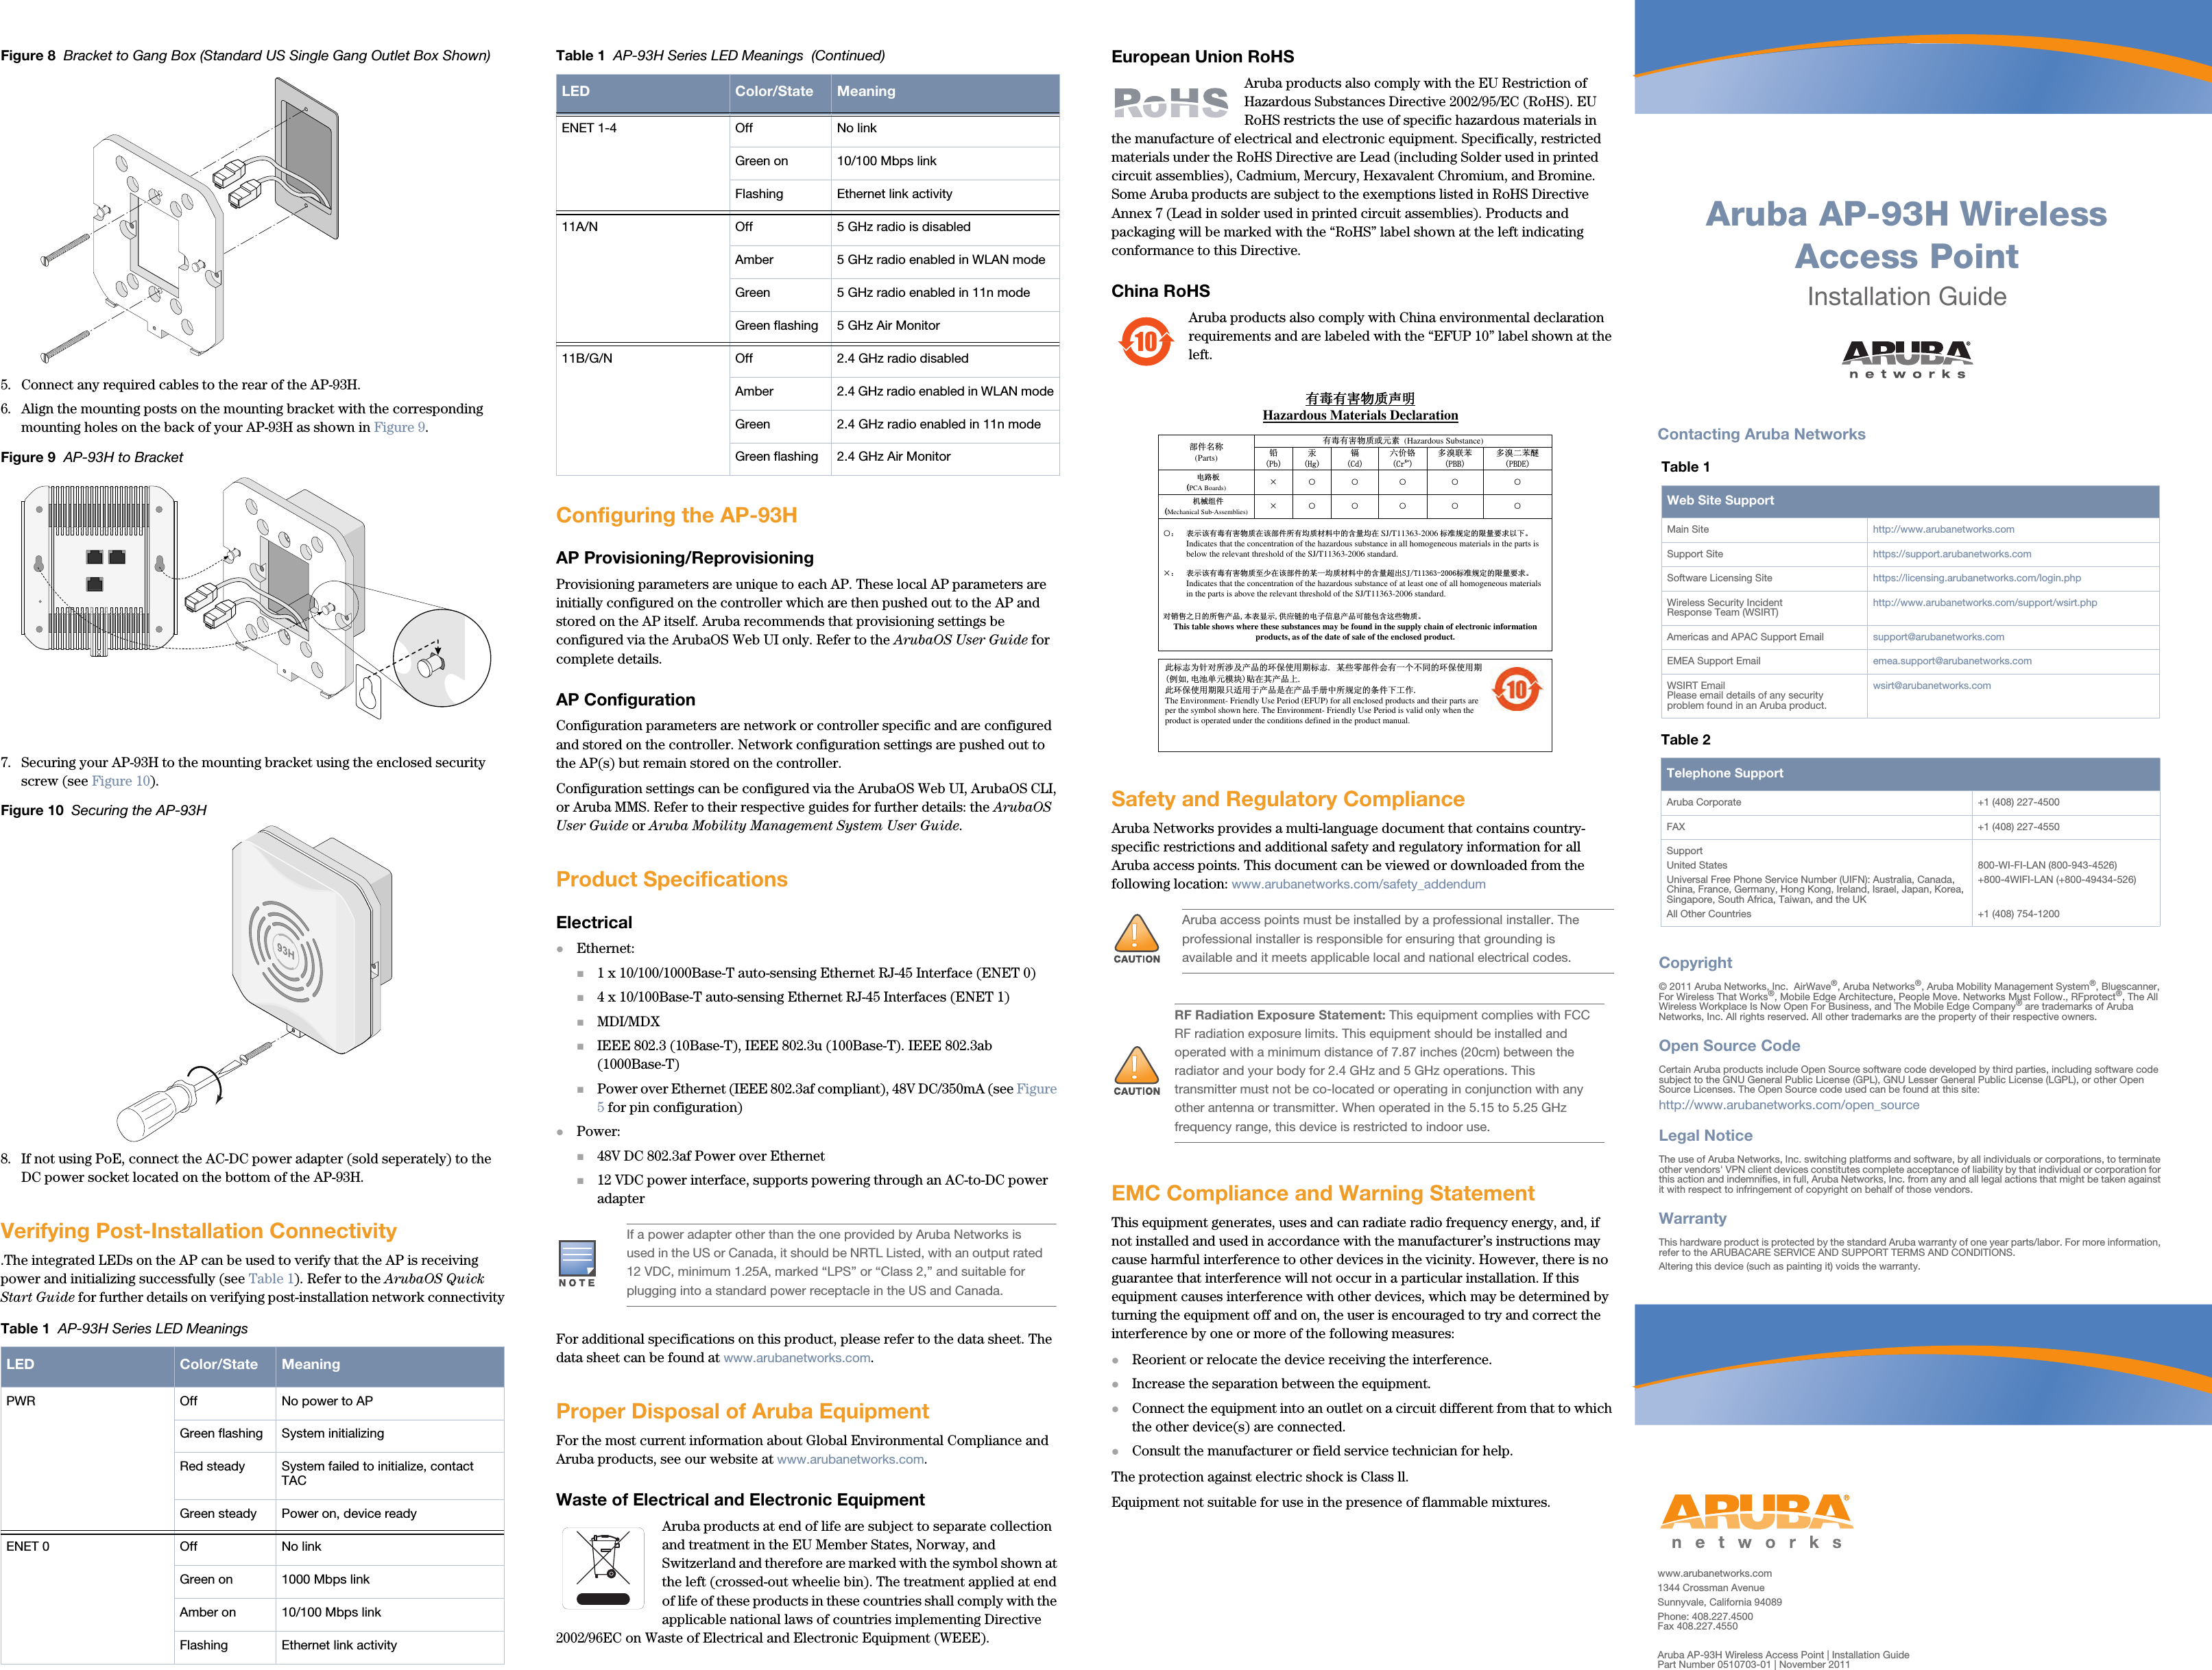  Aruba AP-93H Wireless Access PointInstallation Guidewww.arubanetworks.com1344 Crossman AvenueSunnyvale, California 94089Phone: 408.227.4500Fax 408.227.4550Aruba AP-93H Wireless Access Point | Installation GuidePart Number 0510703-01 | November 2011Contacting Aruba NetworksTable 1  Web Site SupportMain Site http://www.arubanetworks.com  Support Site https://support.arubanetworks.com  Software Licensing Site https://licensing.arubanetworks.com/login.phpWireless Security IncidentResponse Team (WSIRT) http://www.arubanetworks.com/support/wsirt.phpAmericas and APAC Support Email  support@arubanetworks.com  EMEA Support Email emea.support@arubanetworks.comWSIRT EmailPlease email details of any securityproblem found in an Aruba product.wsirt@arubanetworks.comTable 2  Telephone SupportAruba Corporate +1 (408) 227-4500FAX +1 (408) 227-4550SupportUnited StatesUniversal Free Phone Service Number (UIFN): Australia, Canada, China, France, Germany, Hong Kong, Ireland, Israel, Japan, Korea, Singapore, South Africa, Taiwan, and the UKAll Other Countries800-WI-FI-LAN (800-943-4526)+800-4WIFI-LAN (+800-49434-526)+1 (408) 754-1200Copyright© 2011 Aruba Networks, Inc.  AirWave®, Aruba Networks®, Aruba Mobility Management System®, Bluescanner, For Wireless That Works®, Mobile Edge Architecture, People Move. Networks Must Follow., RFprotect®, The All Wireless Workplace Is Now Open For Business, and The Mobile Edge Company® are trademarks of Aruba Networks, Inc. All rights reserved. All other trademarks are the property of their respective owners.Open Source CodeCertain Aruba products include Open Source software code developed by third parties, including software code subject to the GNU General Public License (GPL), GNU Lesser General Public License (LGPL), or other Open Source Licenses. The Open Source code used can be found at this site:http://www.arubanetworks.com/open_sourceLegal NoticeThe use of Aruba Networks, Inc. switching platforms and software, by all individuals or corporations, to terminate other vendors&apos; VPN client devices constitutes complete acceptance of liability by that individual or corporation for this action and indemnifies, in full, Aruba Networks, Inc. from any and all legal actions that might be taken against it with respect to infringement of copyright on behalf of those vendors.WarrantyThis hardware product is protected by the standard Aruba warranty of one year parts/labor. For more information, refer to the ARUBACARE SERVICE AND SUPPORT TERMS AND CONDITIONS.Altering this device (such as painting it) voids the warranty.Figure 8  Bracket to Gang Box (Standard US Single Gang Outlet Box Shown)5. Connect any required cables to the rear of the AP-93H.6. Align the mounting posts on the mounting bracket with the corresponding mounting holes on the back of your AP-93H as shown in Figure 9.Figure 9  AP-93H to Bracket7. Securing your AP-93H to the mounting bracket using the enclosed security screw (see Figure 10).Figure 10  Securing the AP-93H 8. If not using PoE, connect the AC-DC power adapter (sold seperately) to the DC power socket located on the bottom of the AP-93H.Verifying Post-Installation Connectivity.The integrated LEDs on the AP can be used to verify that the AP is receiving power and initializing successfully (see Table 1). Refer to the ArubaOS Quick Start Guide for further details on verifying post-installation network connectivityConfiguring the AP-93HAP Provisioning/ReprovisioningProvisioning parameters are unique to each AP. These local AP parameters are initially configured on the controller which are then pushed out to the AP and stored on the AP itself. Aruba recommends that provisioning settings be configured via the ArubaOS Web UI only. Refer to the ArubaOS User Guide for complete details.AP ConfigurationConfiguration parameters are network or controller specific and are configured and stored on the controller. Network configuration settings are pushed out to the AP(s) but remain stored on the controller.Configuration settings can be configured via the ArubaOS Web UI, ArubaOS CLI, or Aruba MMS. Refer to their respective guides for further details: the ArubaOS User Guide or Aruba Mobility Management System User Guide.Product SpecificationsElectricalEthernet: 1 x 10/100/1000Base-T auto-sensing Ethernet RJ-45 Interface (ENET 0)4 x 10/100Base-T auto-sensing Ethernet RJ-45 Interfaces (ENET 1)MDI/MDXIEEE 802.3 (10Base-T), IEEE 802.3u (100Base-T). IEEE 802.3ab (1000Base-T)Power over Ethernet (IEEE 802.3af compliant), 48V DC/350mA (see Figure 5 for pin configuration)Power:48V DC 802.3af Power over Ethernet12 VDC power interface, supports powering through an AC-to-DC power adapterFor additional specifications on this product, please refer to the data sheet. The data sheet can be found at www.arubanetworks.com.Proper Disposal of Aruba EquipmentFor the most current information about Global Environmental Compliance and Aruba products, see our website at www.arubanetworks.com.Waste of Electrical and Electronic EquipmentAruba products at end of life are subject to separate collection and treatment in the EU Member States, Norway, and Switzerland and therefore are marked with the symbol shown at the left (crossed-out wheelie bin). The treatment applied at end of life of these products in these countries shall comply with the applicable national laws of countries implementing Directive 2002/96EC on Waste of Electrical and Electronic Equipment (WEEE).European Union RoHSAruba products also comply with the EU Restriction of Hazardous Substances Directive 2002/95/EC (RoHS). EU RoHS restricts the use of specific hazardous materials in the manufacture of electrical and electronic equipment. Specifically, restricted materials under the RoHS Directive are Lead (including Solder used in printed circuit assemblies), Cadmium, Mercury, Hexavalent Chromium, and Bromine. Some Aruba products are subject to the exemptions listed in RoHS Directive Annex 7 (Lead in solder used in printed circuit assemblies). Products and packaging will be marked with the “RoHS” label shown at the left indicating conformance to this Directive.China RoHSAruba products also comply with China environmental declaration requirements and are labeled with the “EFUP 10” label shown at the left.Safety and Regulatory ComplianceAruba Networks provides a multi-language document that contains country-specific restrictions and additional safety and regulatory information for all Aruba access points. This document can be viewed or downloaded from the following location: www.arubanetworks.com/safety_addendum EMC Compliance and Warning StatementThis equipment generates, uses and can radiate radio frequency energy, and, if not installed and used in accordance with the manufacturer’s instructions may cause harmful interference to other devices in the vicinity. However, there is no guarantee that interference will not occur in a particular installation. If this equipment causes interference with other devices, which may be determined by turning the equipment off and on, the user is encouraged to try and correct the interference by one or more of the following measures:Reorient or relocate the device receiving the interference.Increase the separation between the equipment.Connect the equipment into an outlet on a circuit different from that to which the other device(s) are connected.Consult the manufacturer or field service technician for help.The protection against electric shock is Class ll. Equipment not suitable for use in the presence of flammable mixtures.Table 1  AP-93H Series LED Meanings  LED Color/State MeaningPWR Off No power to APGreen flashing System initializingRed steady System failed to initialize, contact TACGreen steady Power on, device readyENET 0 Off No linkGreen on 1000 Mbps linkAmber on 10/100 Mbps linkFlashing Ethernet link activityENET 1-4 Off No linkGreen on 10/100 Mbps linkFlashing Ethernet link activity11A/N Off 5 GHz radio is disabledAmber  5 GHz radio enabled in WLAN modeGreen 5 GHz radio enabled in 11n modeGreen flashing 5 GHz Air Monitor 11B/G/N Off 2.4 GHz radio disabledAmber 2.4 GHz radio enabled in WLAN modeGreen 2.4 GHz radio enabled in 11n modeGreen flashing 2.4 GHz Air Monitor If a power adapter other than the one provided by Aruba Networks is used in the US or Canada, it should be NRTL Listed, with an output rated 12 VDC, minimum 1.25A, marked “LPS” or “Class 2,” and suitable for plugging into a standard power receptacle in the US and Canada.Table 1  AP-93H Series LED Meanings  (Continued)LED Color/State MeaningAruba access points must be installed by a professional installer. The professional installer is responsible for ensuring that grounding is available and it meets applicable local and national electrical codes.RF Radiation Exposure Statement: This equipment complies with FCC RF radiation exposure limits. This equipment should be installed and operated with a minimum distance of 7.87 inches (20cm) between the radiator and your body for 2.4 GHz and 5 GHz operations. This transmitter must not be co-located or operating in conjunction with any other antenna or transmitter. When operated in the 5.15 to 5.25 GHz frequency range, this device is restricted to indoor use.10᳝↦᳝ᆇ⠽䋼ໄᯢHazardous Materials Declaration᳝↦᳝ᆇ⠽䋼៪ܗ㋴(Hazardous Substance) 䚼ӊৡ⿄(Parts)  䪙3E∲+J䬝&amp;G݁Ӌ䫀&amp;U໮⒈㘨㣃3%%໮⒈Ѡ㣃䝮3%&apos;(⬉䏃ᵓ(PCA Boards) hƻ ƻ ƻ ƻ ƻᴎẄ㒘ӊ(Mechanical Sub-Assemblies) hƻ ƻ ƻ ƻ ƻƻ˖ 㸼⼎䆹᳝↦᳝ᆇ⠽䋼೼䆹䚼ӊ᠔᳝ഛ䋼ᴤ᭭Ёⱘ৿䞣ഛ೼SJ/T11363-2006 ᷛޚ㾘ᅮⱘ䰤䞣㽕∖ҹϟǄIndicates that the concentration of the hazardous substance in all homogeneous materials in the parts is below the relevant threshold of the SJ/T11363-2006 standard.h˖ 㸼⼎䆹᳝↦᳝ᆇ⠽䋼㟇ᇥ೼䆹䚼ӊⱘᶤϔഛ䋼ᴤ᭭Ёⱘ৿䞣䍙ߎ6-7ᷛޚ㾘ᅮⱘ䰤䞣㽕∖ǄIndicates that the concentration of the hazardous substance of at least one of all homogeneous materials in the parts is above the relevant threshold of the SJ/T11363-2006 standard. ᇍ䫔ଂП᮹ⱘ᠔ଂѻકᴀ㸼ᰒ⼎կᑨ䫒ⱘ⬉ᄤֵᙃѻકৃ㛑ࣙ৿䖭ѯ⠽䋼ǄThis table shows where these substances may be found in the supply chain of electronic information products, as of the date of sale of the enclosed product.   ℸᷛᖫЎ䩜ᇍ᠔⍝ঞѻકⱘ⦃ֱՓ⫼ᳳᷛᖫᶤѯ䳊䚼ӊӮ᳝ϔϾϡৠⱘ⦃ֱՓ⫼ᳳ՟བ⬉∴ऩܗ῵ഫ䌈೼݊ѻકϞℸ⦃ֱՓ⫼ᳳ䰤া䗖⫼Ѣѻકᰃ೼ѻક᠟ݠЁ᠔㾘ᅮⱘᴵӊϟᎹ԰The Environment- Friendly Use Period (EFUP) for all enclosed products and their parts are per the symbol shown here. The Environment- Friendly Use Period is valid only when the product is operated under the conditions defined in the product manual. 